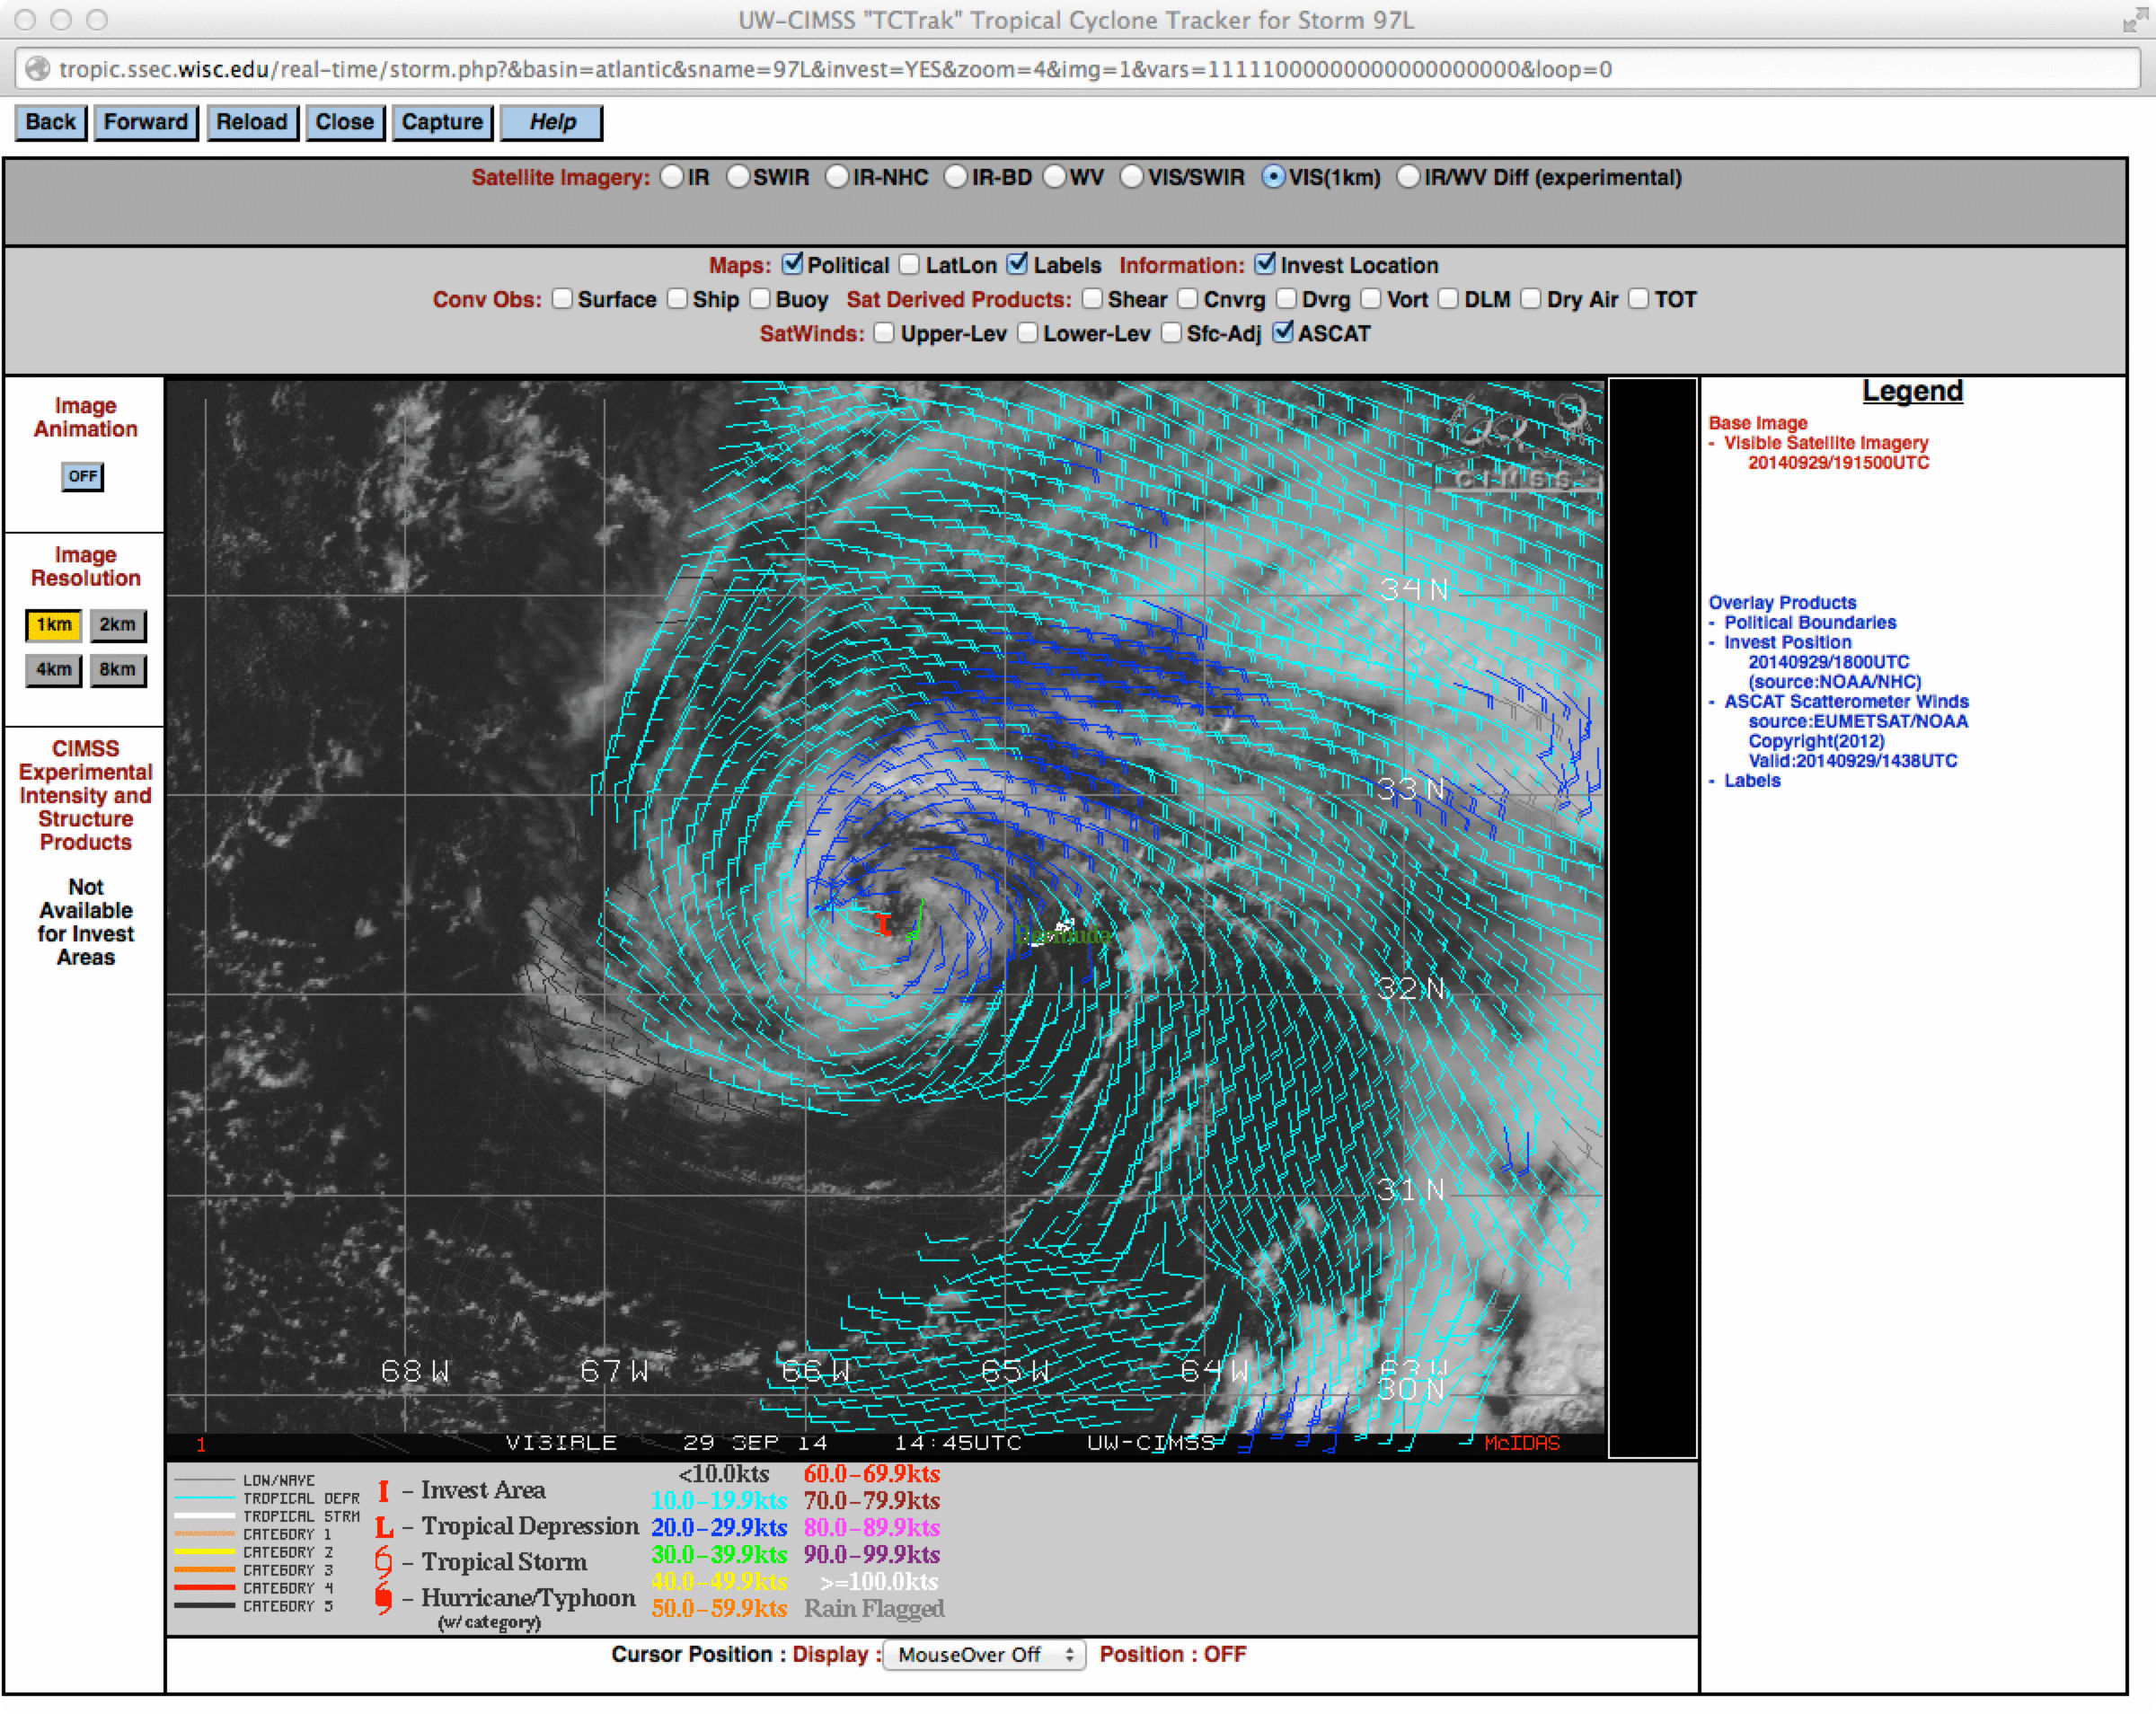 GOES-13 0.63 µm visible channel image with Metop ASCAT scatterometer surface winds